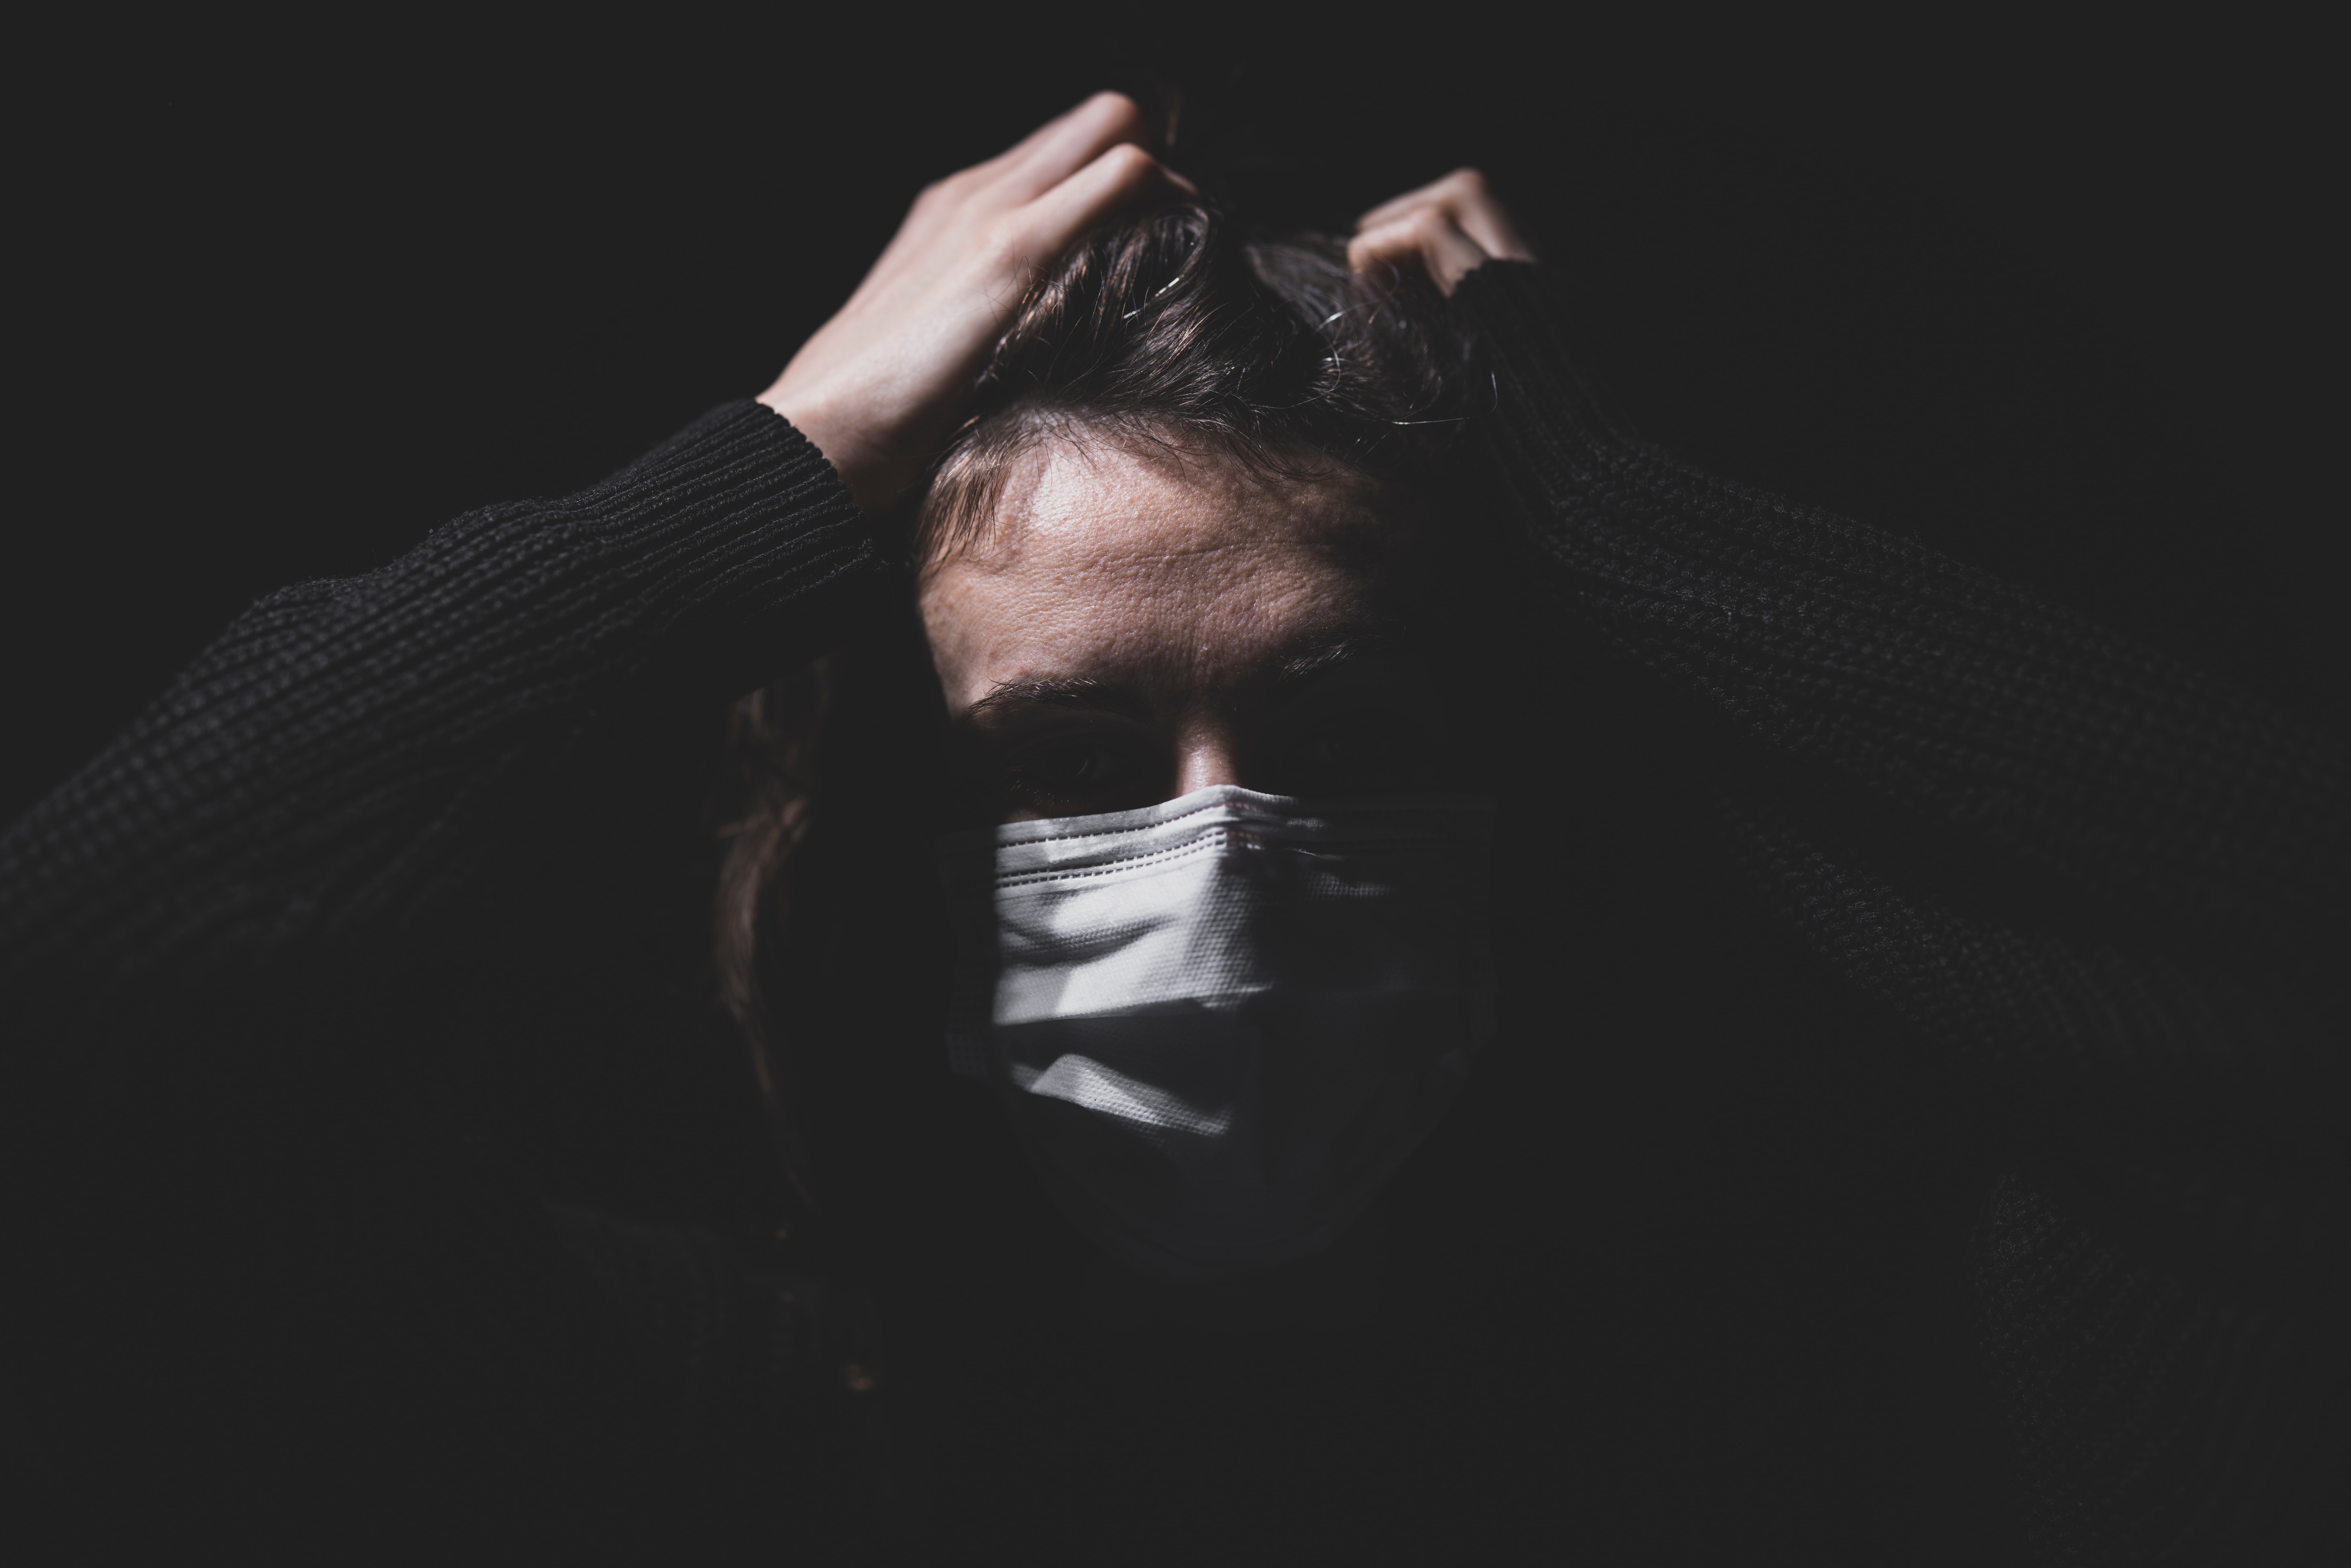 someone wearing a mask against a dark background